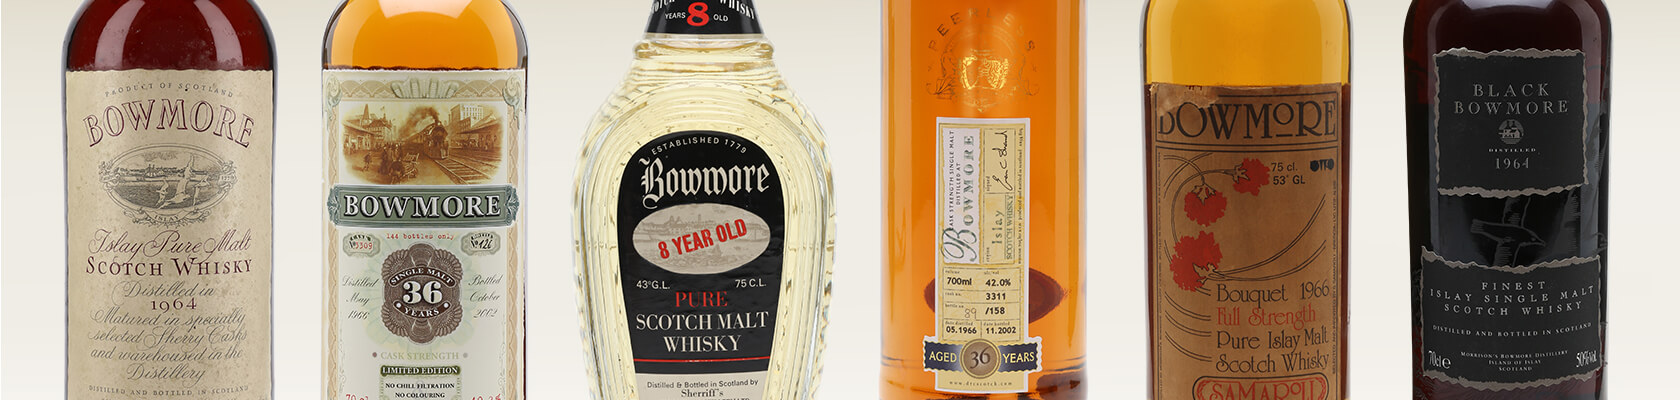 Most Wanted - Bowmore